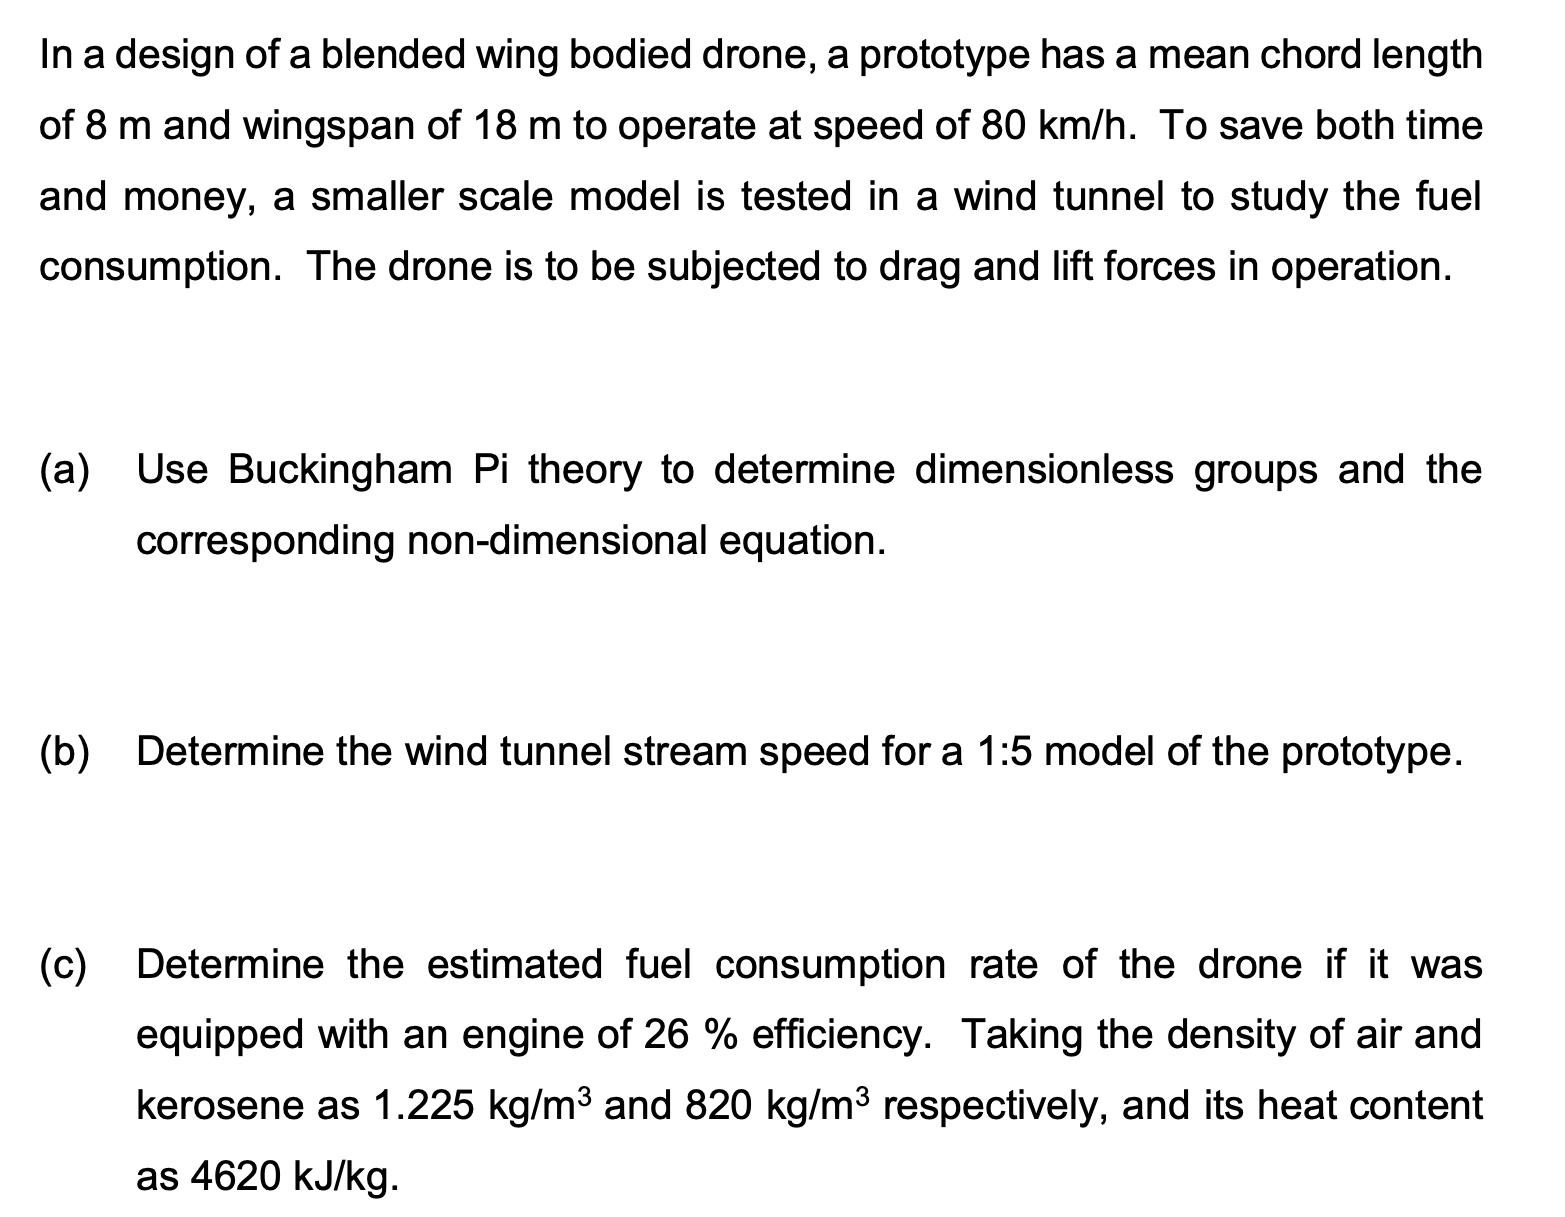 In a design of a blended wing bodied drone, a prototype has a mean chord length of 8 m and wingspan of 18 m